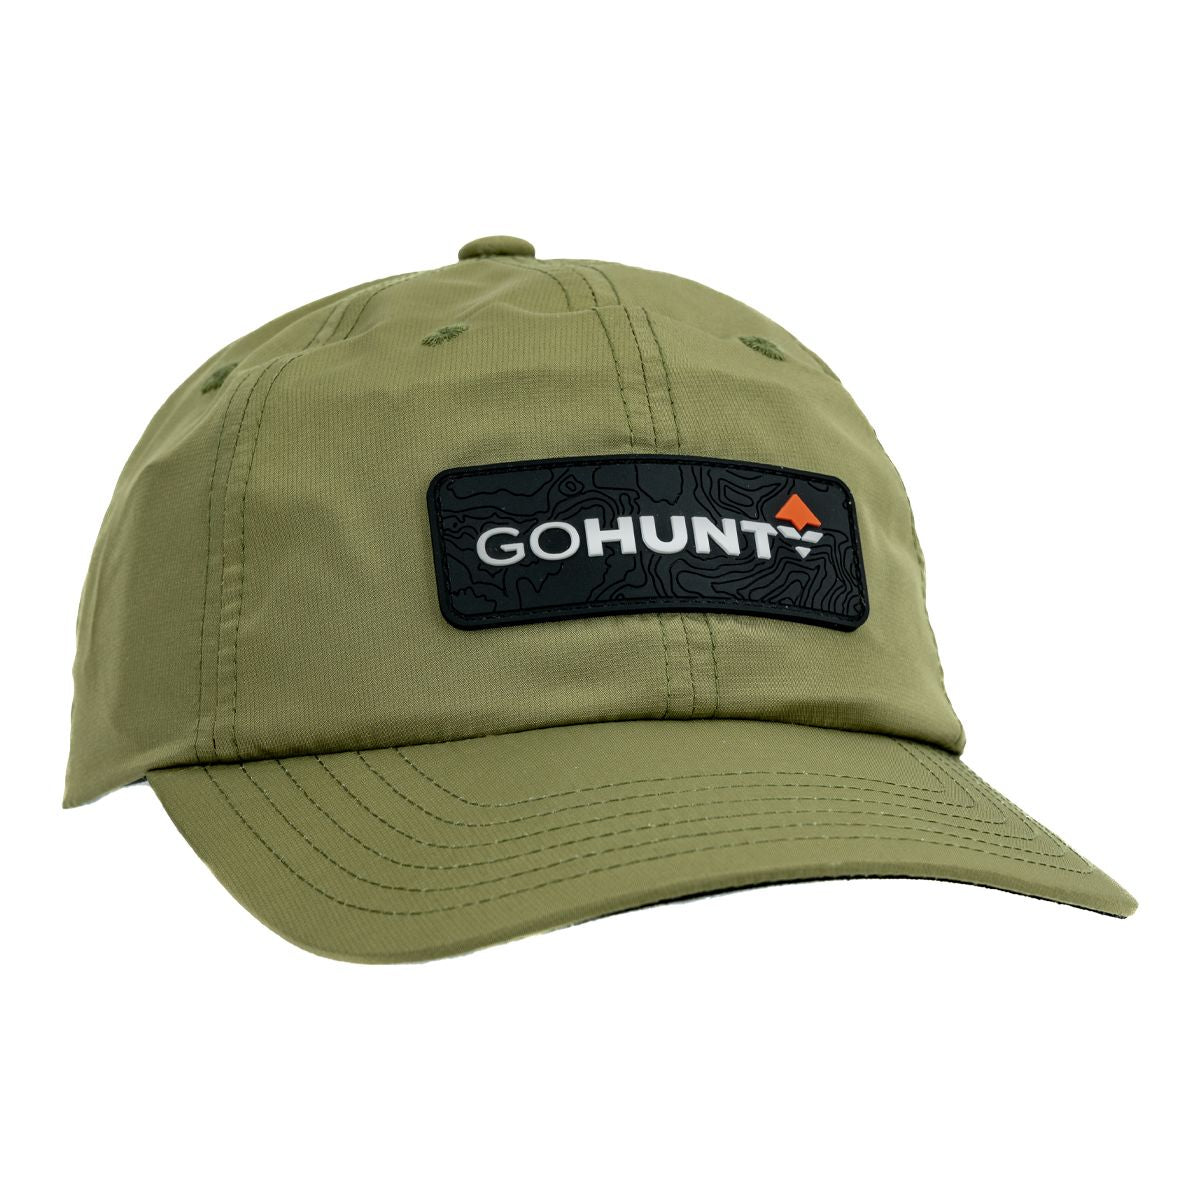 GOHUNT Topo DH Hat in Olive by GOHUNT | GOHUNT - GOHUNT Shop